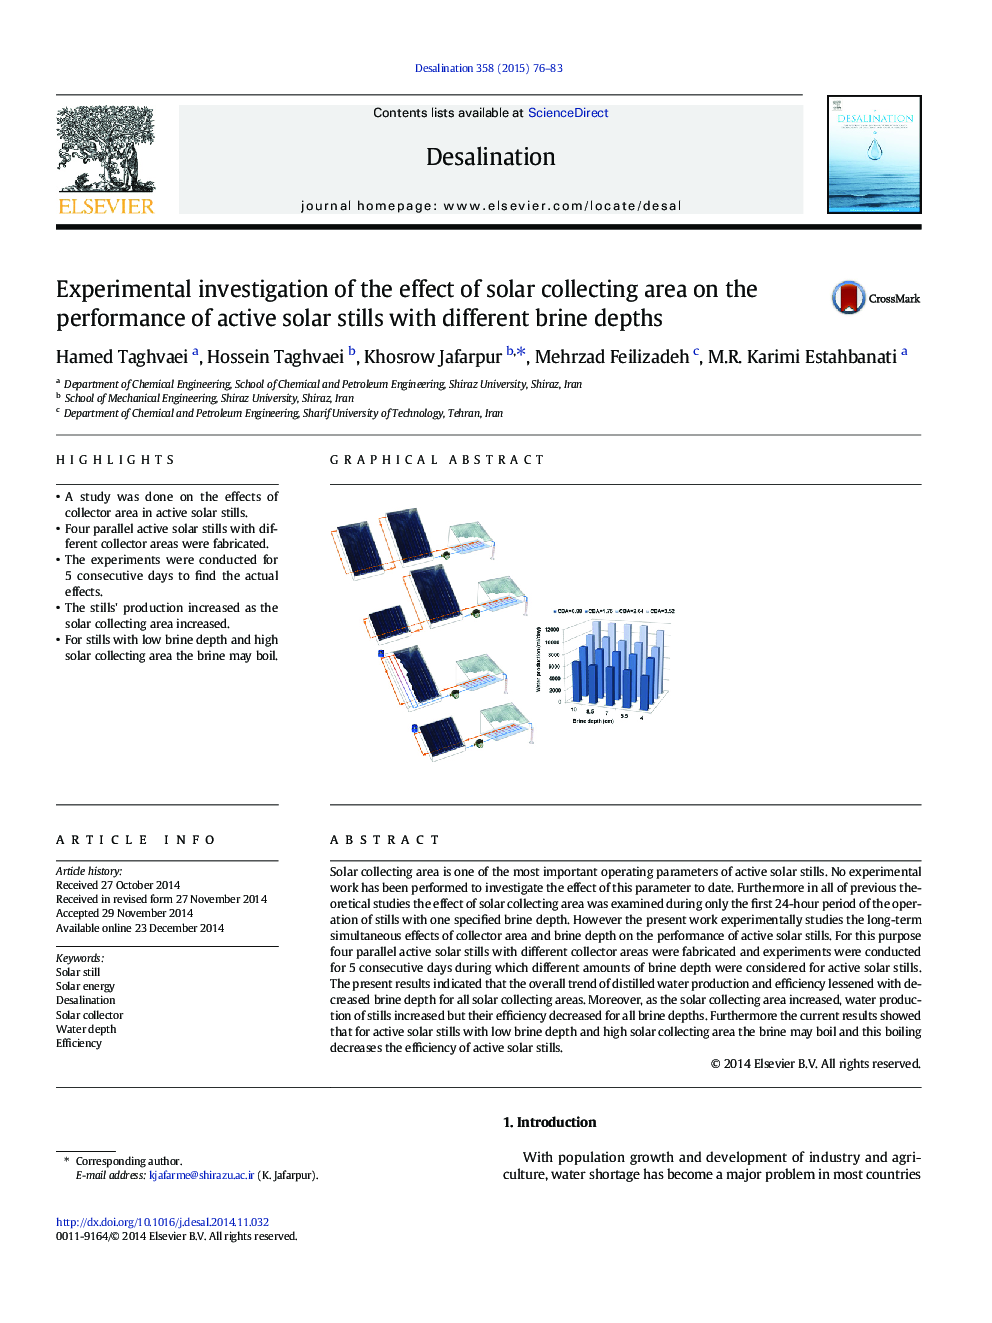 Experimental investigation of the effect of solar collecting area on the performance of active solar stills with different brine depths